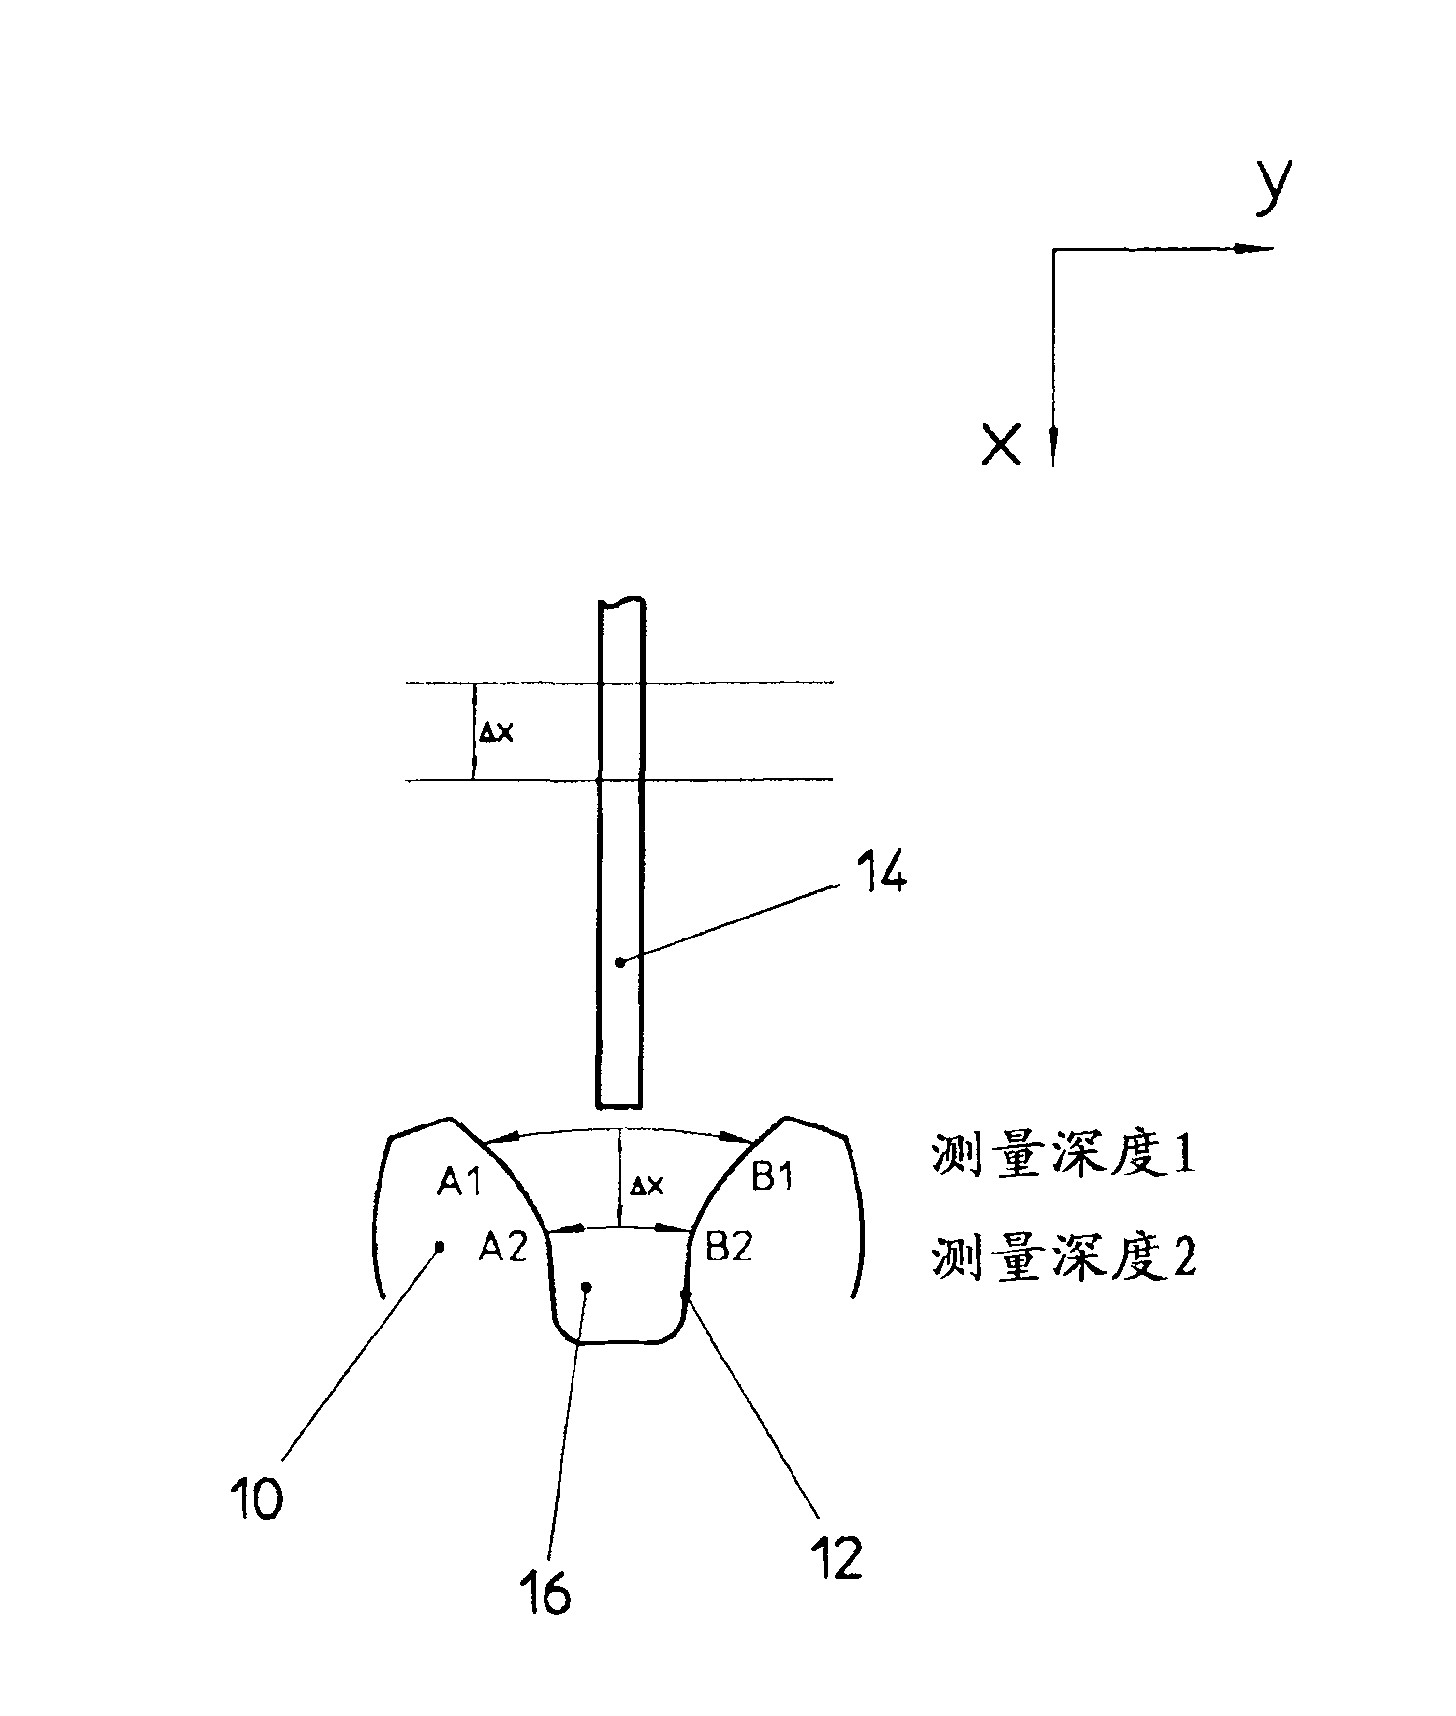 Method for testing gear wheels during their production in gear compound cutter